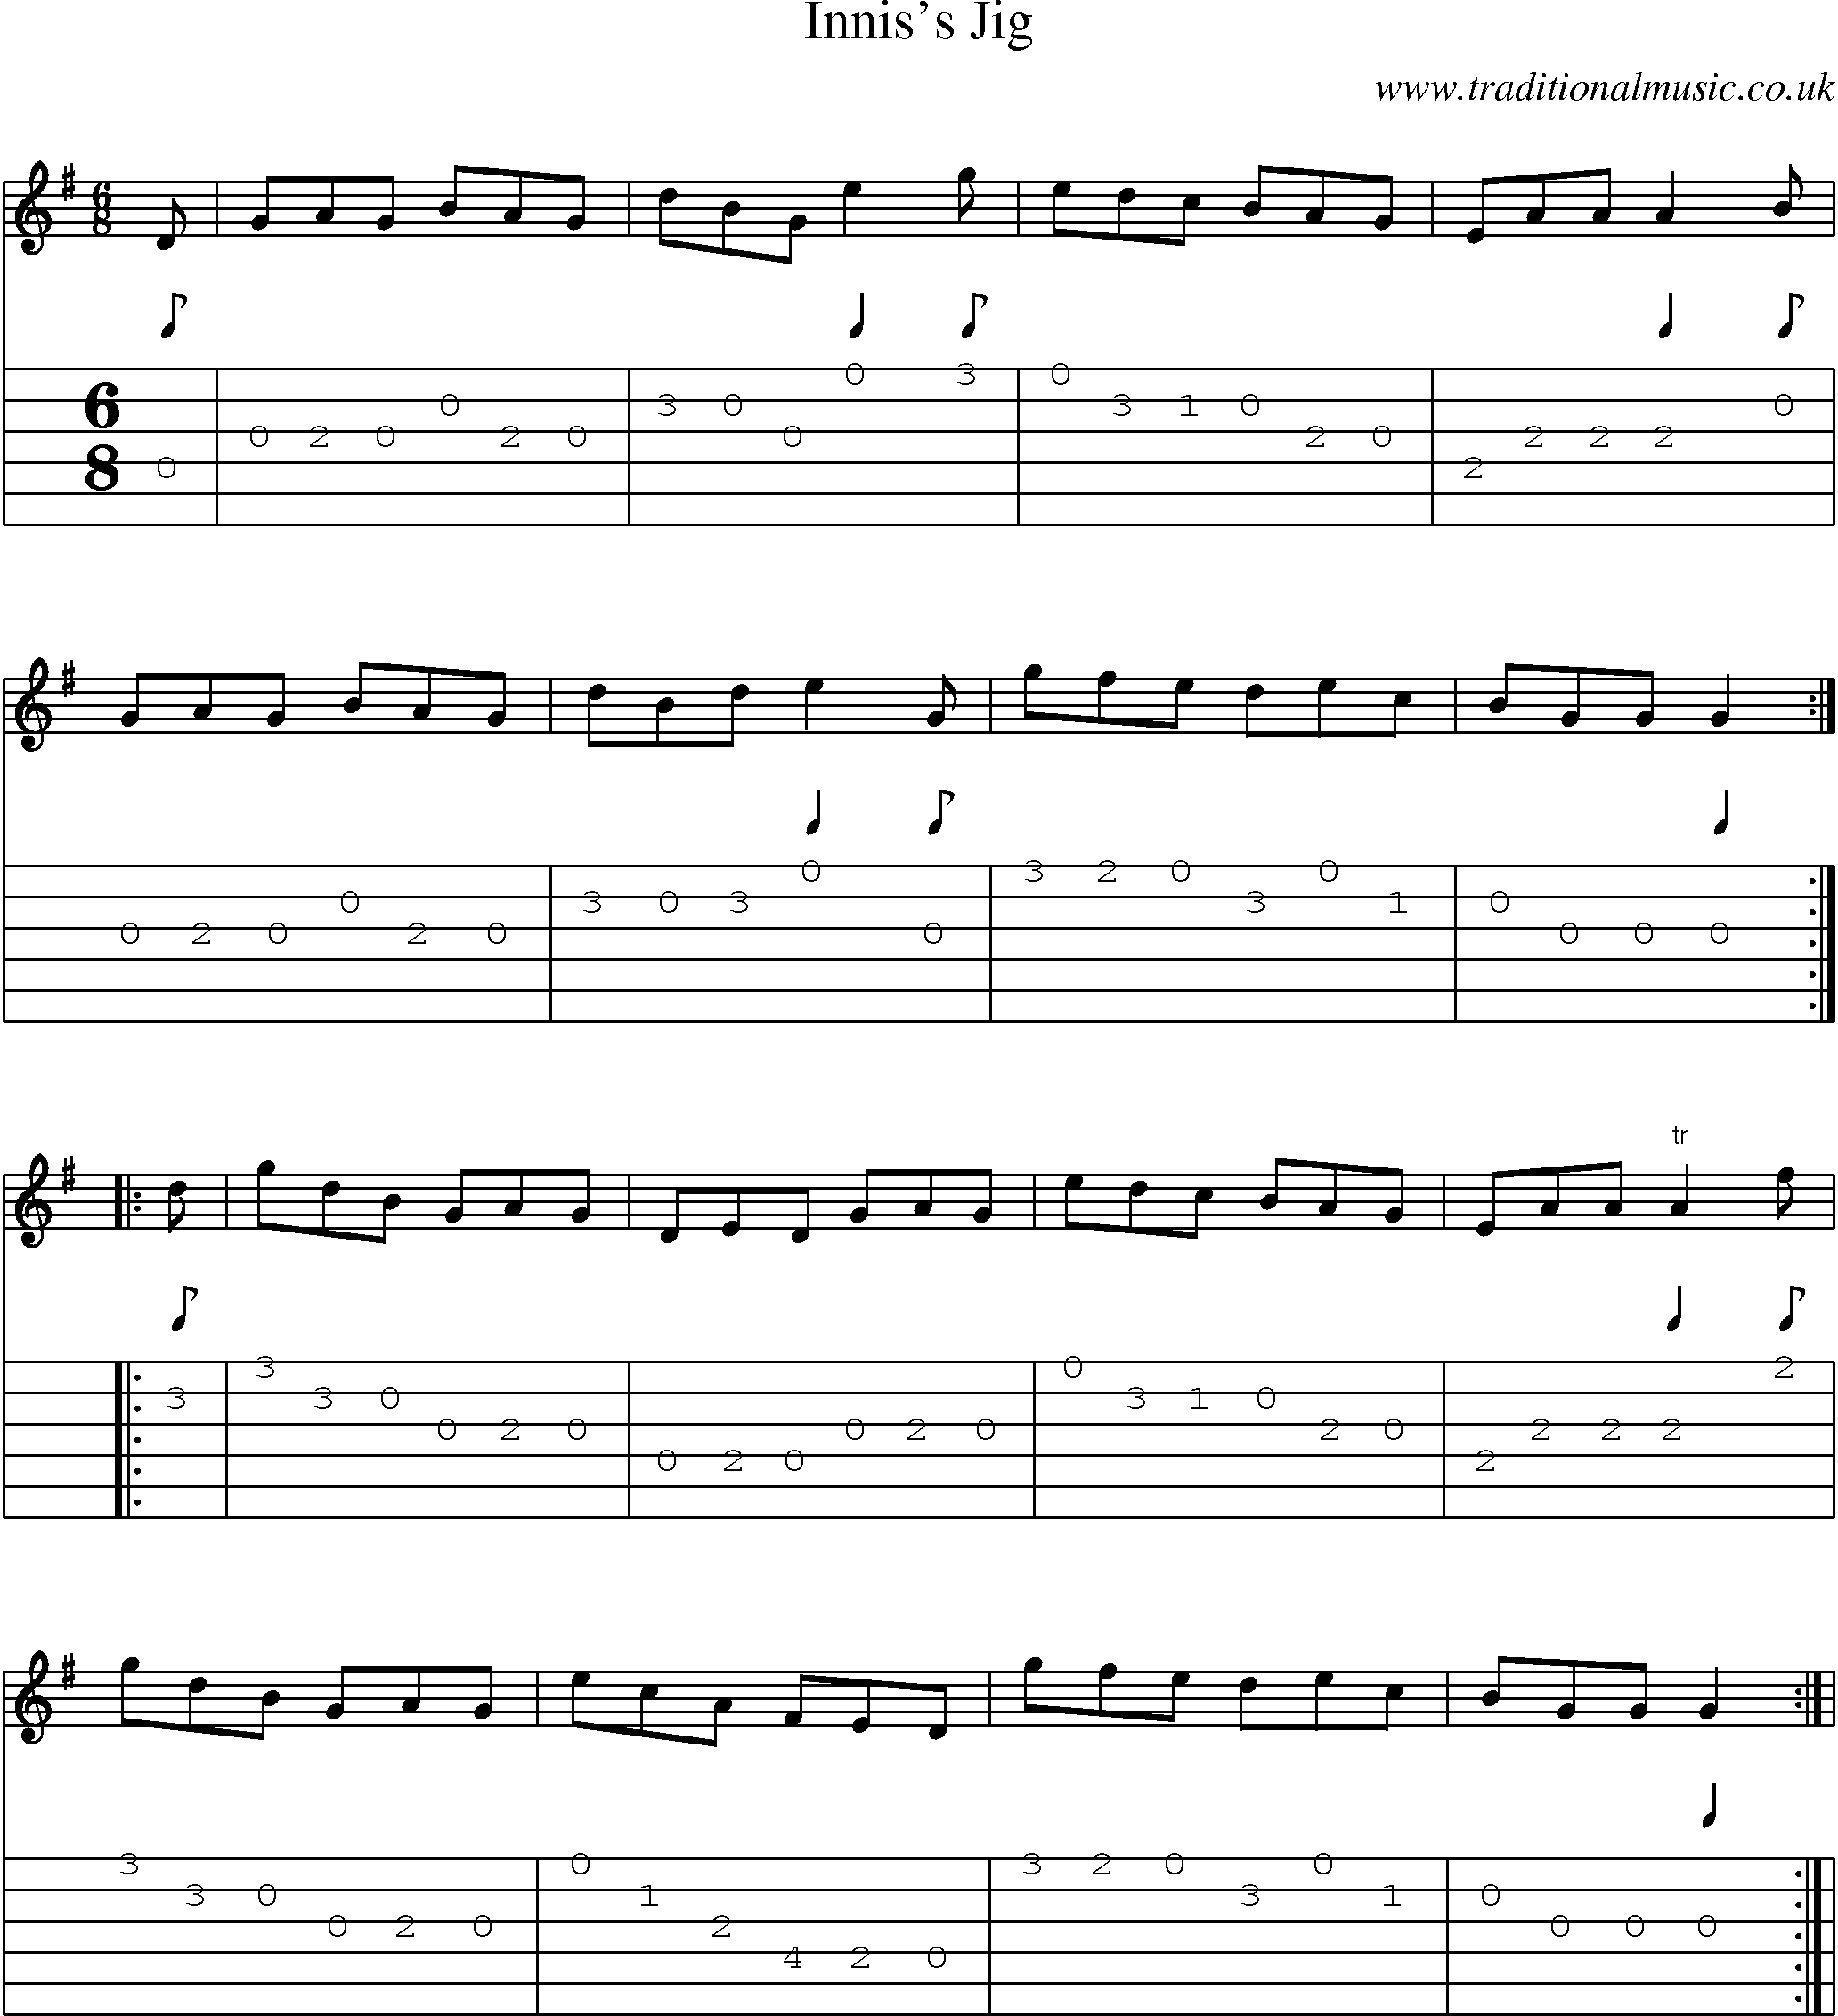 Music Score and Guitar Tabs for Inniss Jig